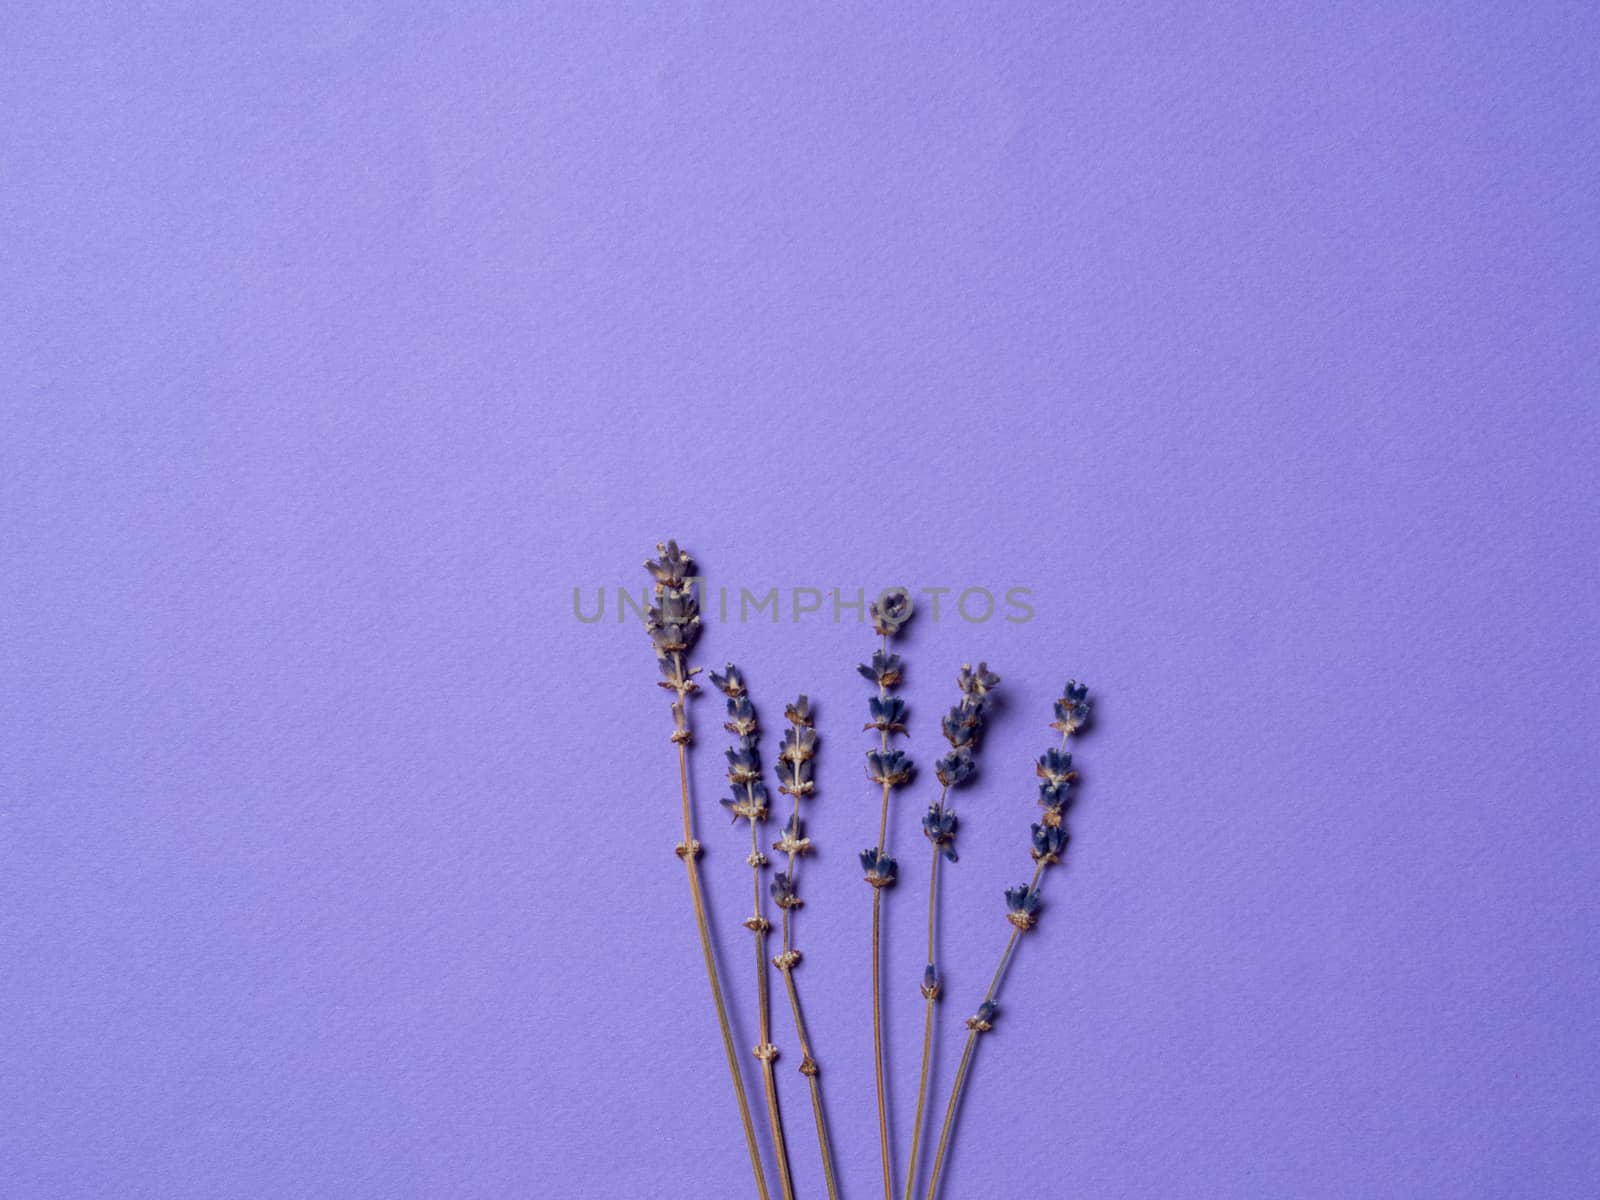 violet lavender flowers arranged on bright purple background. Top view, flat lay. Minimal concept. Copy space for text.